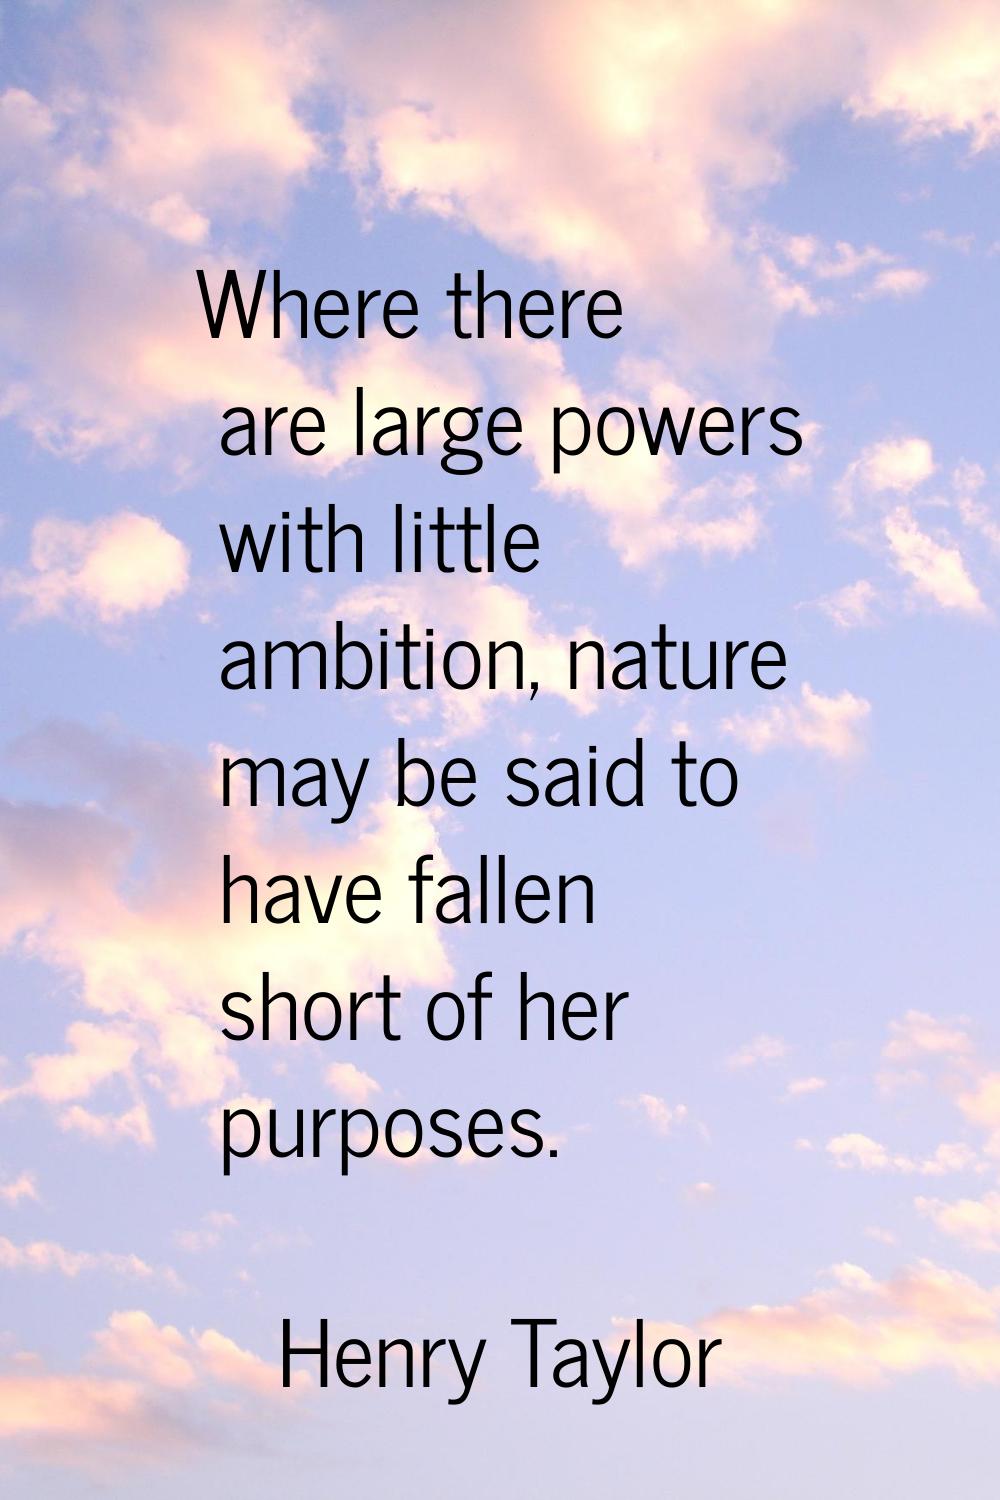 Where there are large powers with little ambition, nature may be said to have fallen short of her p